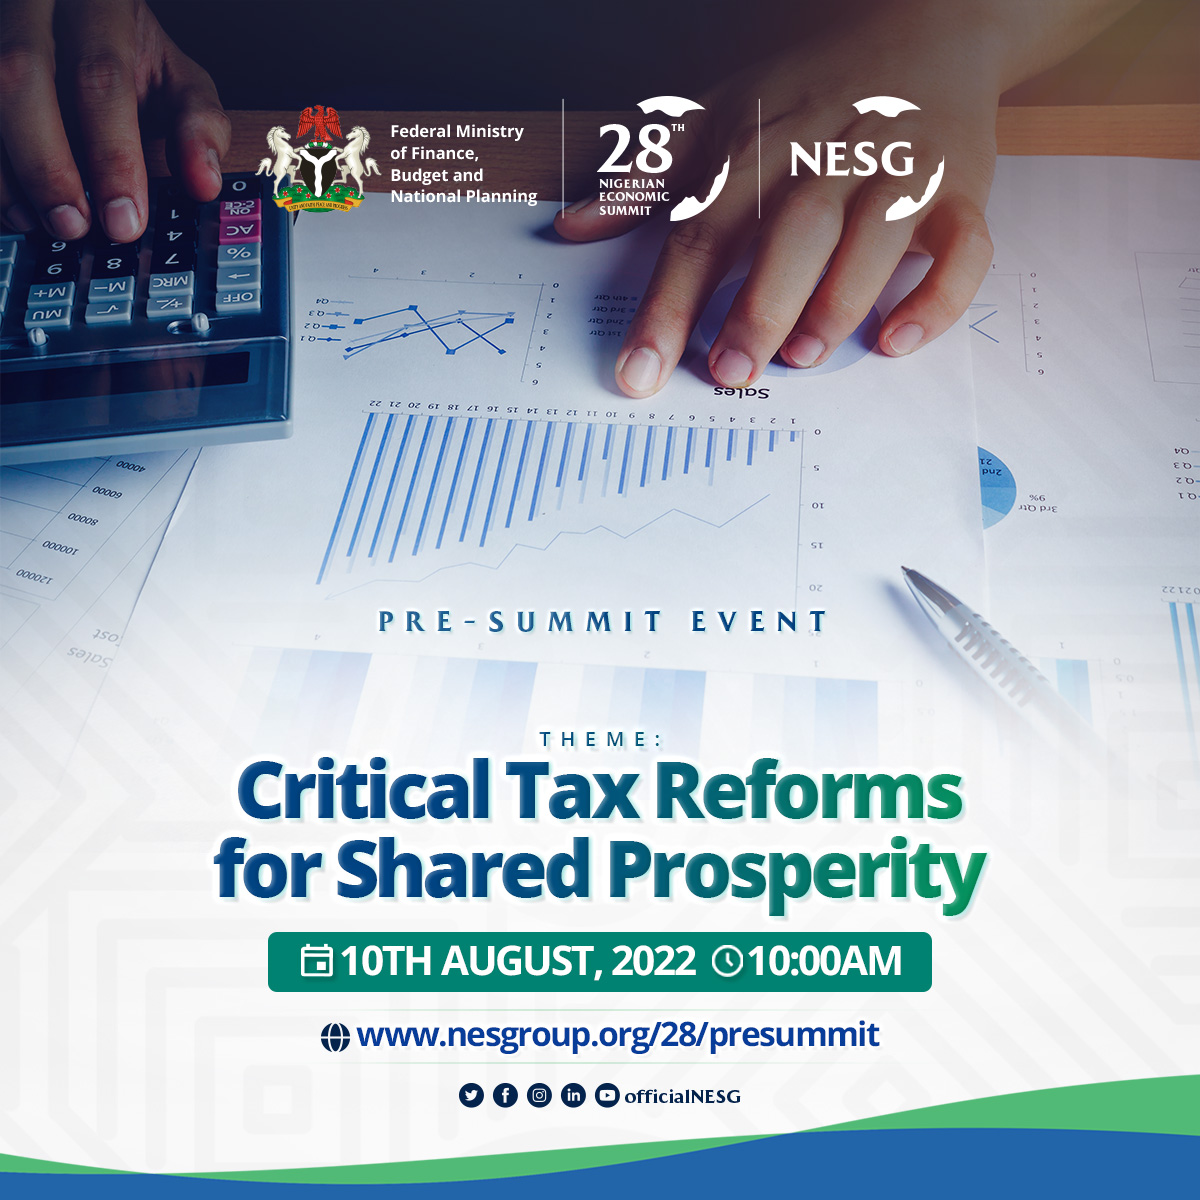 #NES28 Presummit Event: Critical Tax Reforms for Shared Prosperity,The Nigerian Economic Summit Group, The NESG, think-tank, think, tank, nigeria, policy, nesg, africa, number one think in africa, best think in nigeria, the best think tank in africa, top 10 think tanks in nigeria, think tank nigeria, economy, business, PPD, public, private, dialogue, Nigeria, Nigeria PPD, NIGERIA, PPD, The Nigerian Economic Summit Group